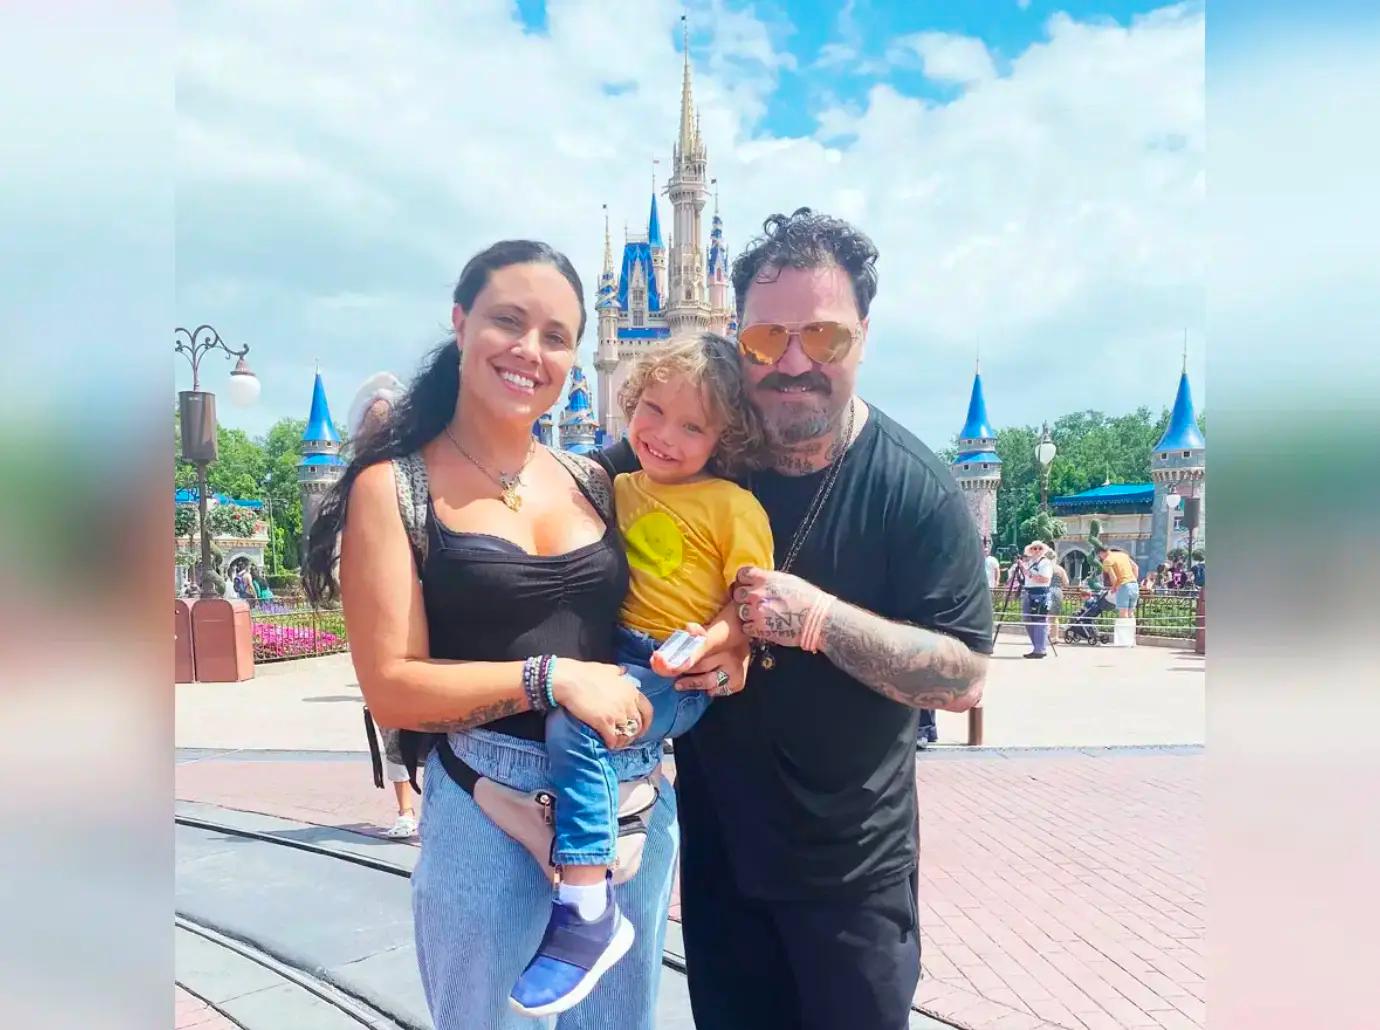 Bam Margera Summoned To Pay $15,000 Monthly Child Support Payments